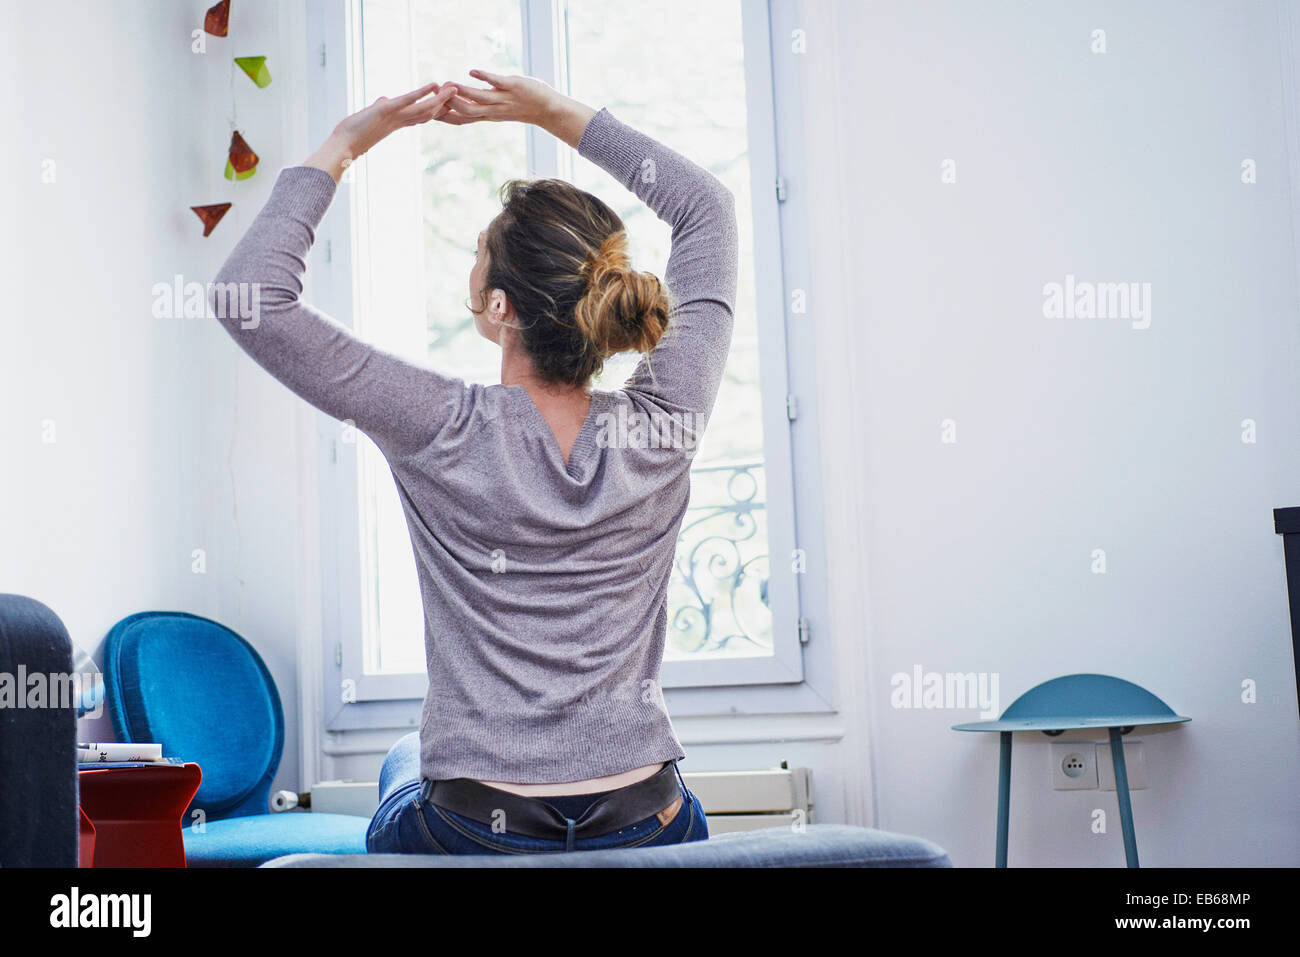 WOMAN STRETCHING Banque D'Images